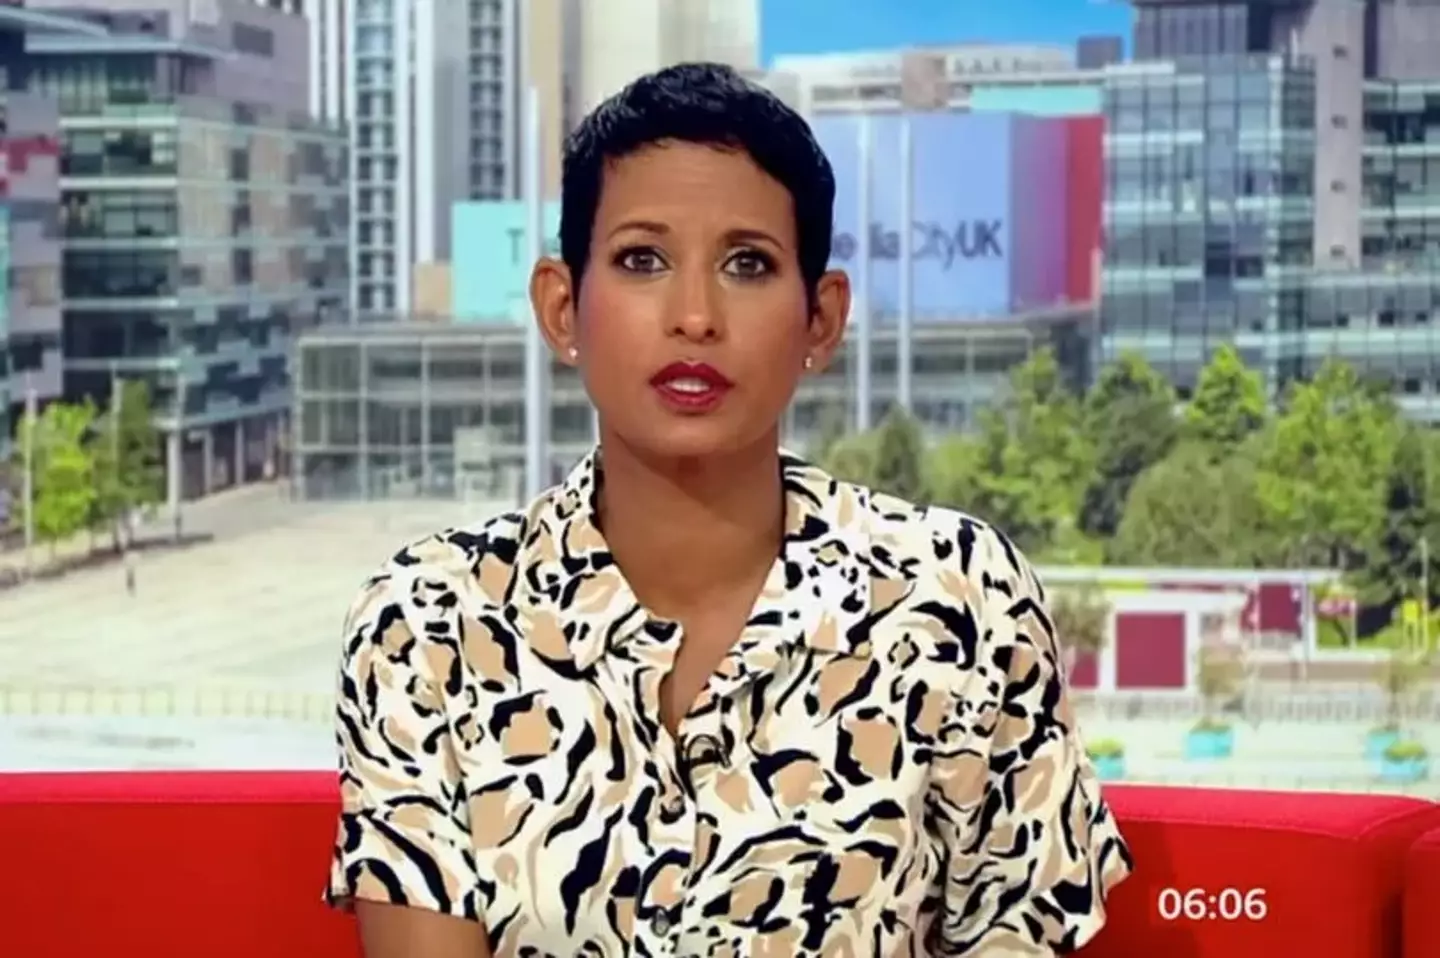 An emotional Naga Munchetty fought back the tears while learning of BBC newsreader George Alagiah’s death live on air.